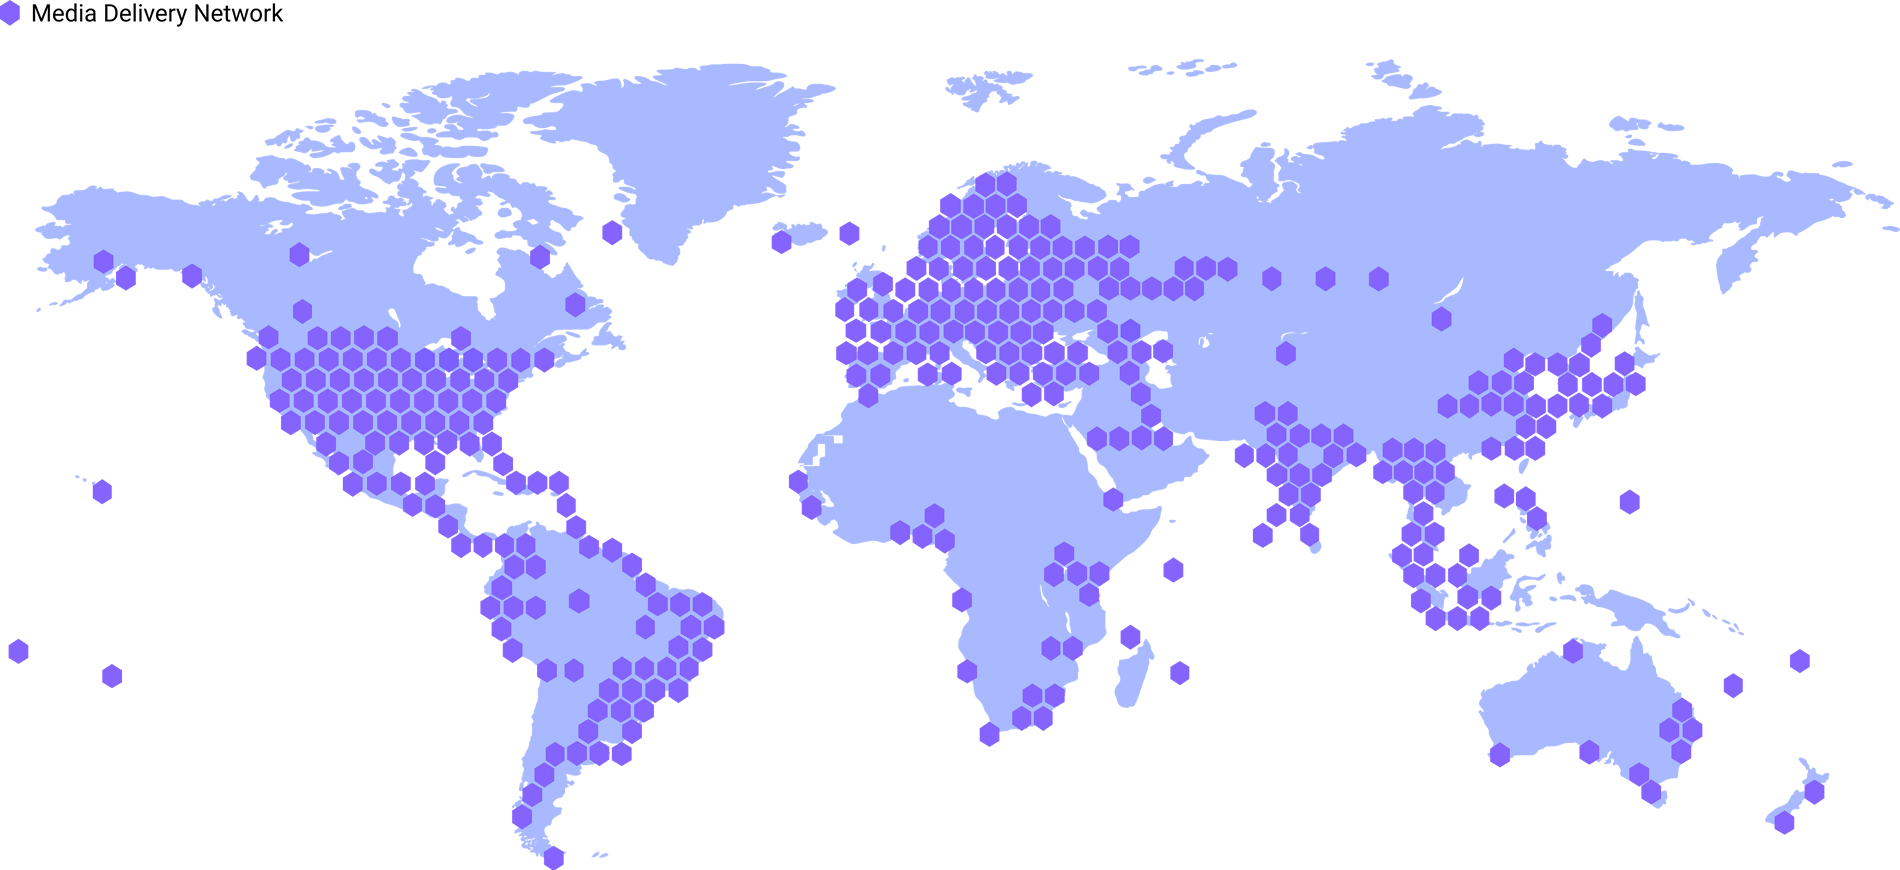 An example of multi-CDN service with global network of connected PoPs distributed in any continents